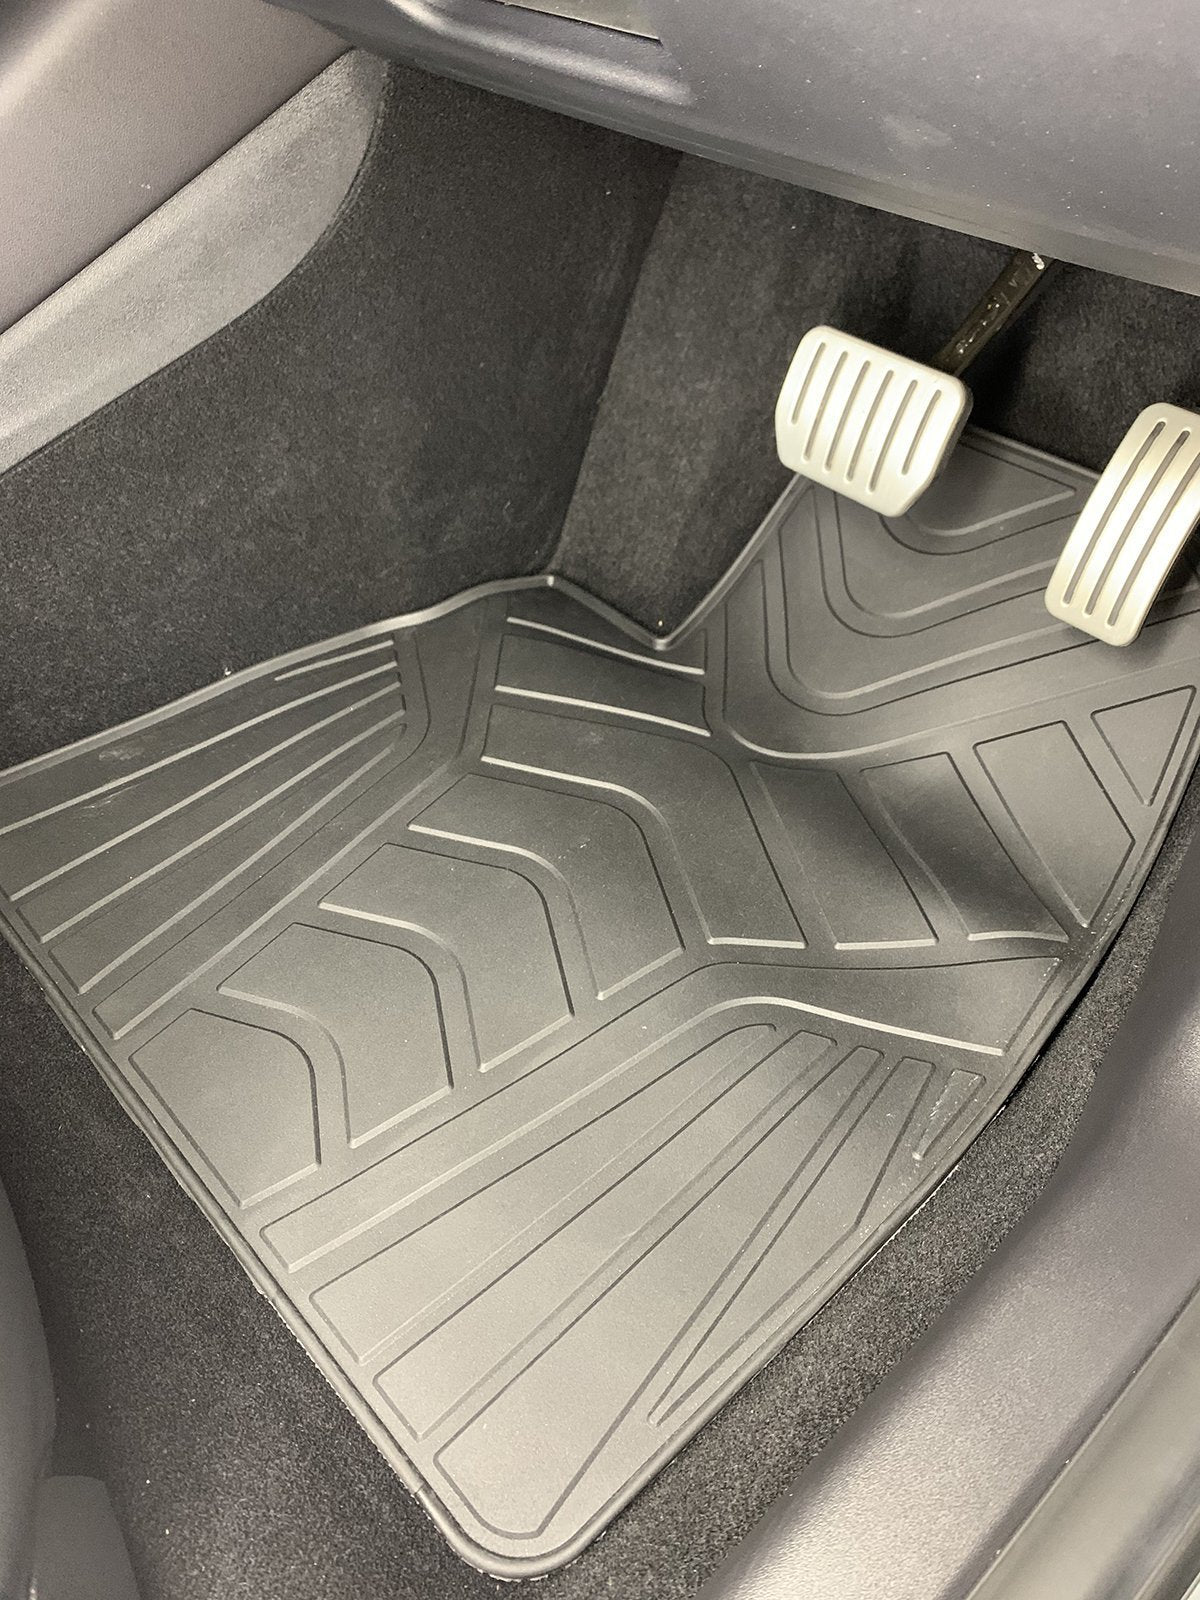 RHD UK only_Model 3: All-weather Interior Floor Mats (3 pcs, Synthetic Latex Rubber) - Torque Alliance